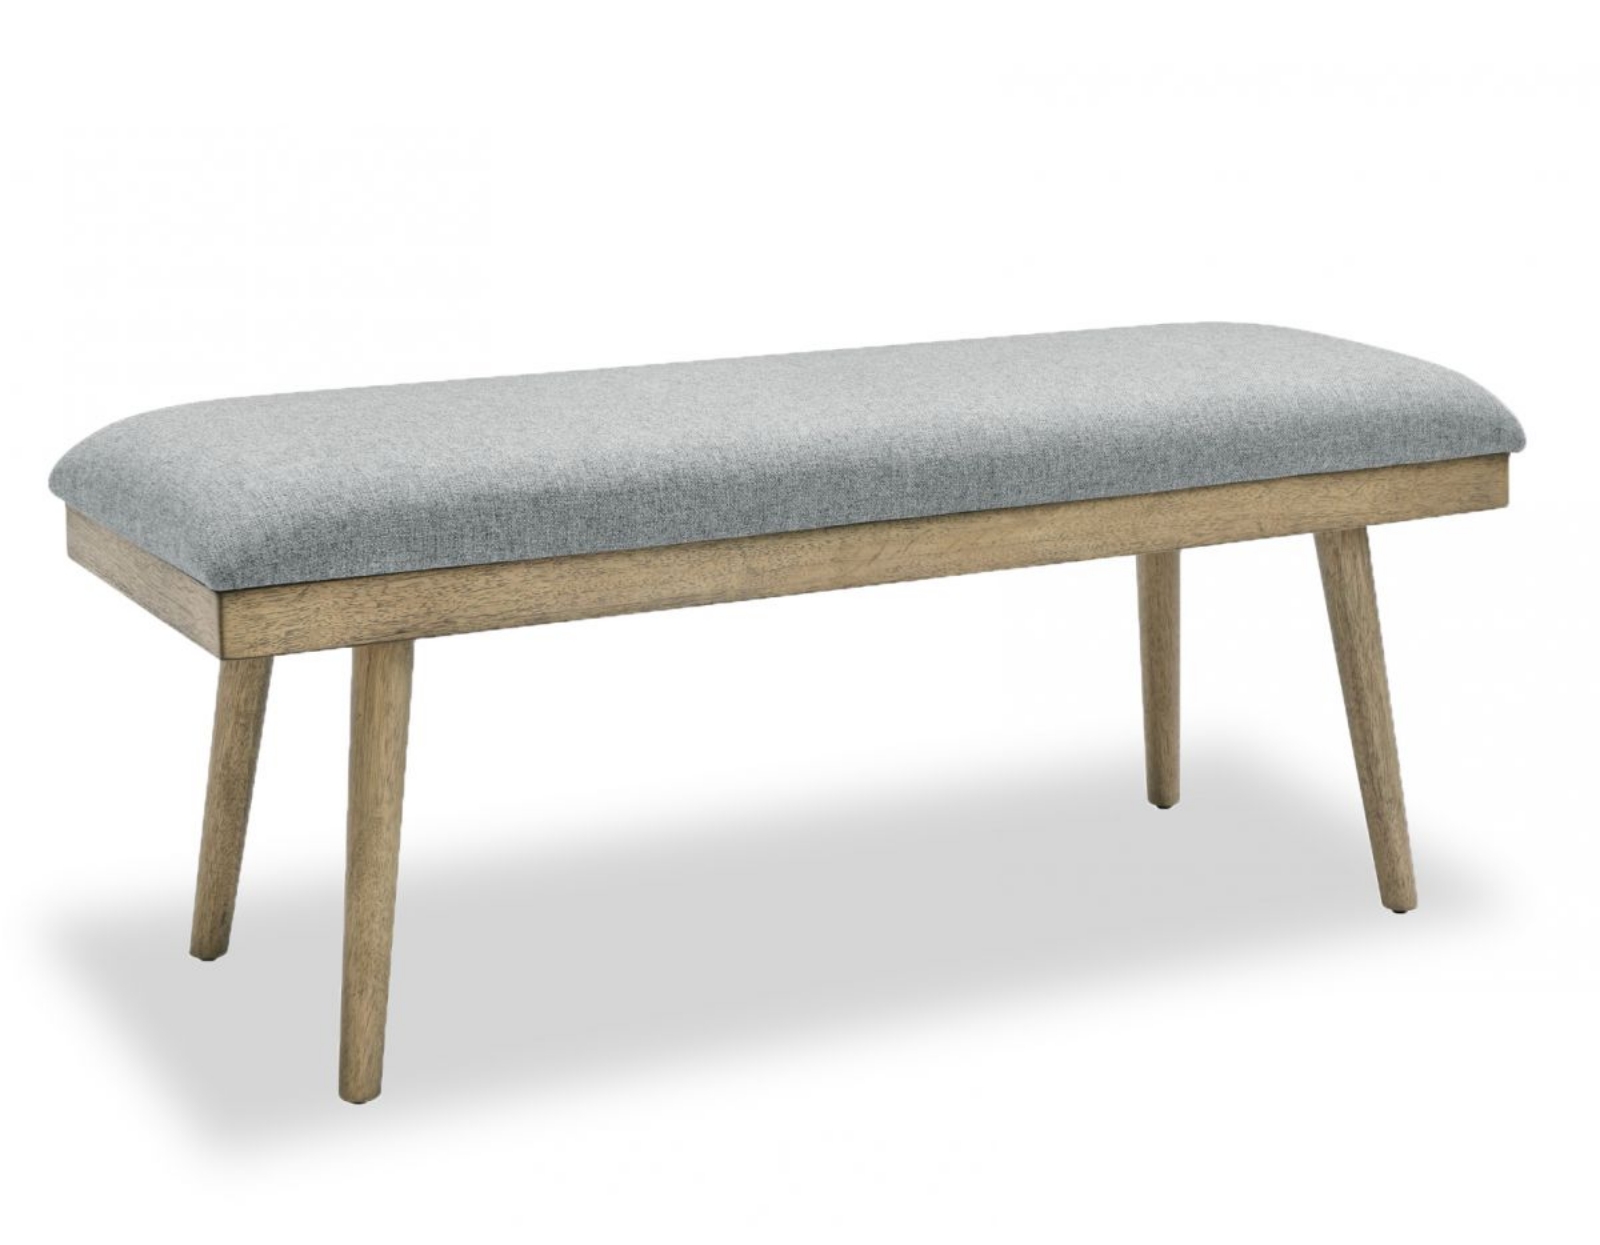 Picture of Vida Dining Bench